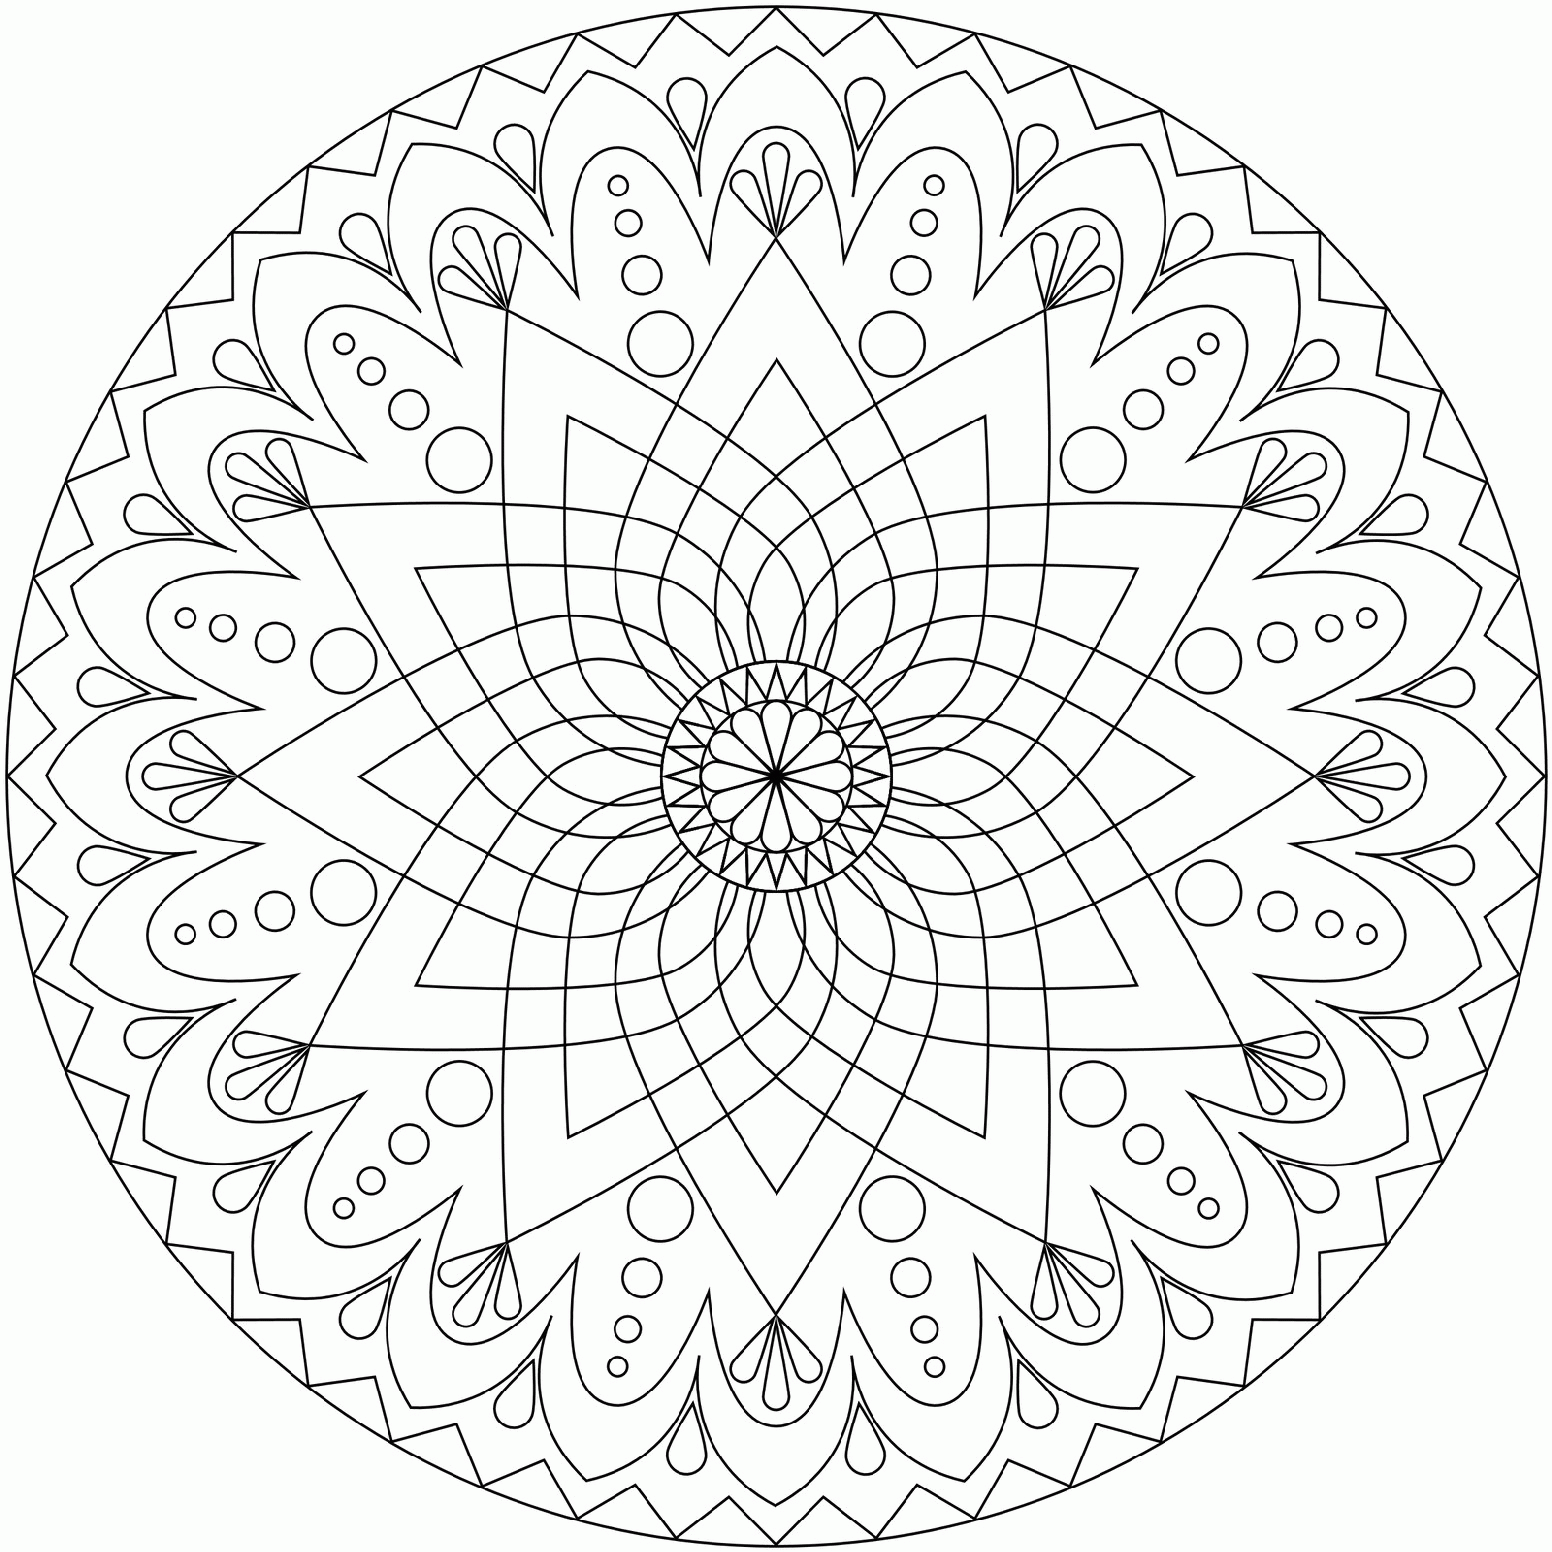 design mandala coloring pages | Best Coloring Page Site